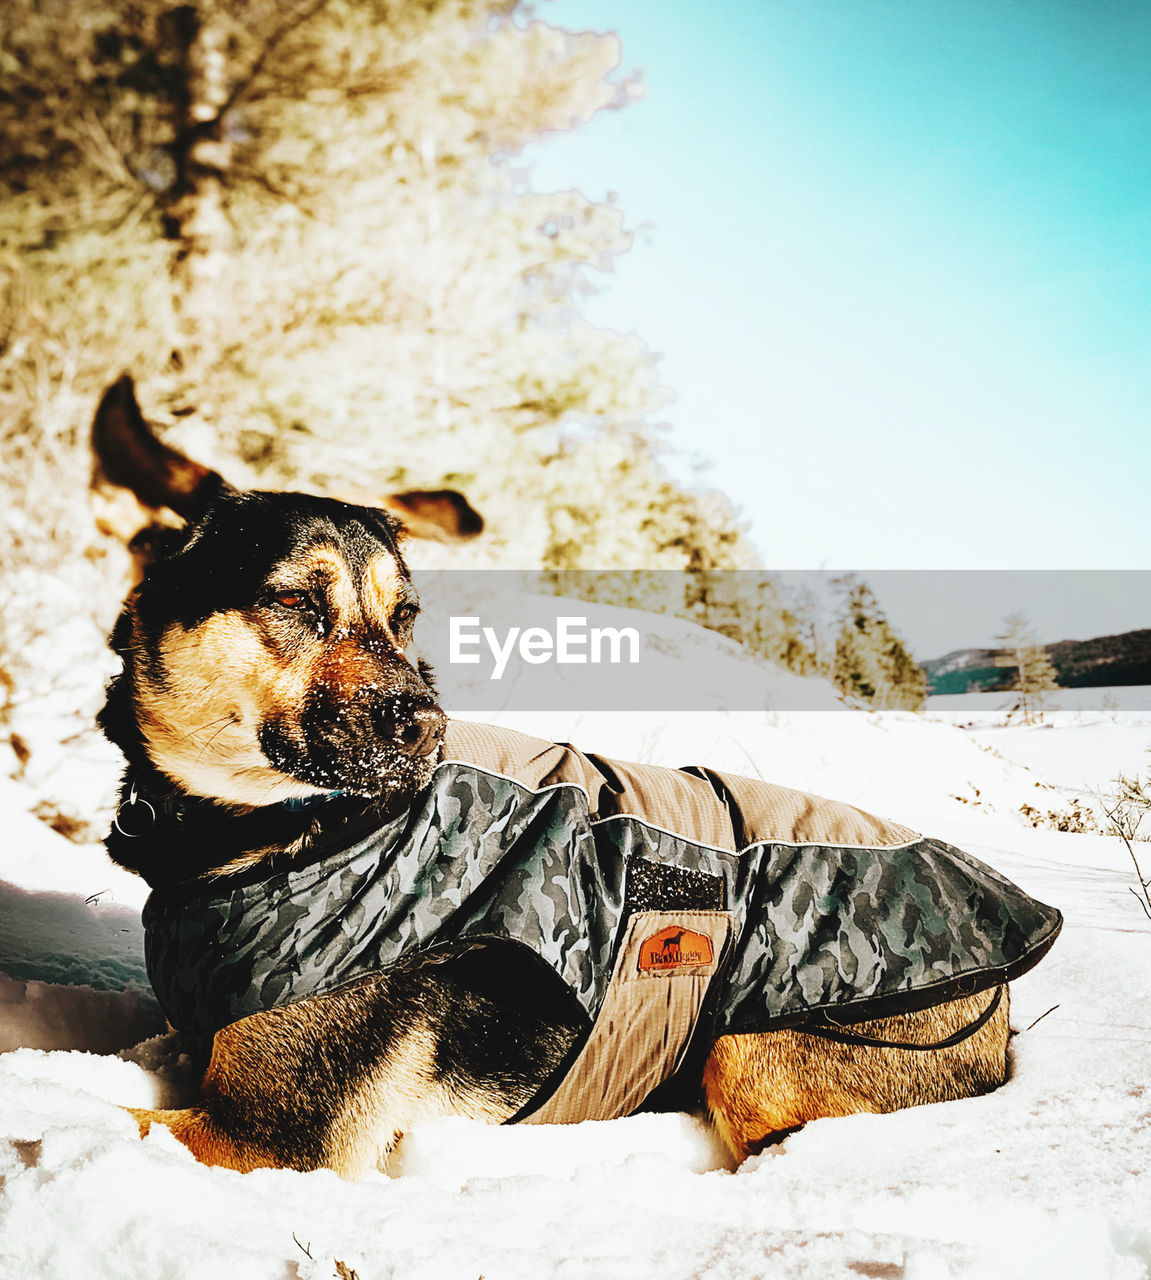 canine, dog, domestic animals, pet, animal, one animal, animal themes, mammal, winter, snow, nature, cold temperature, day, no people, sunlight, outdoors, relaxation, sky, clothing, sitting